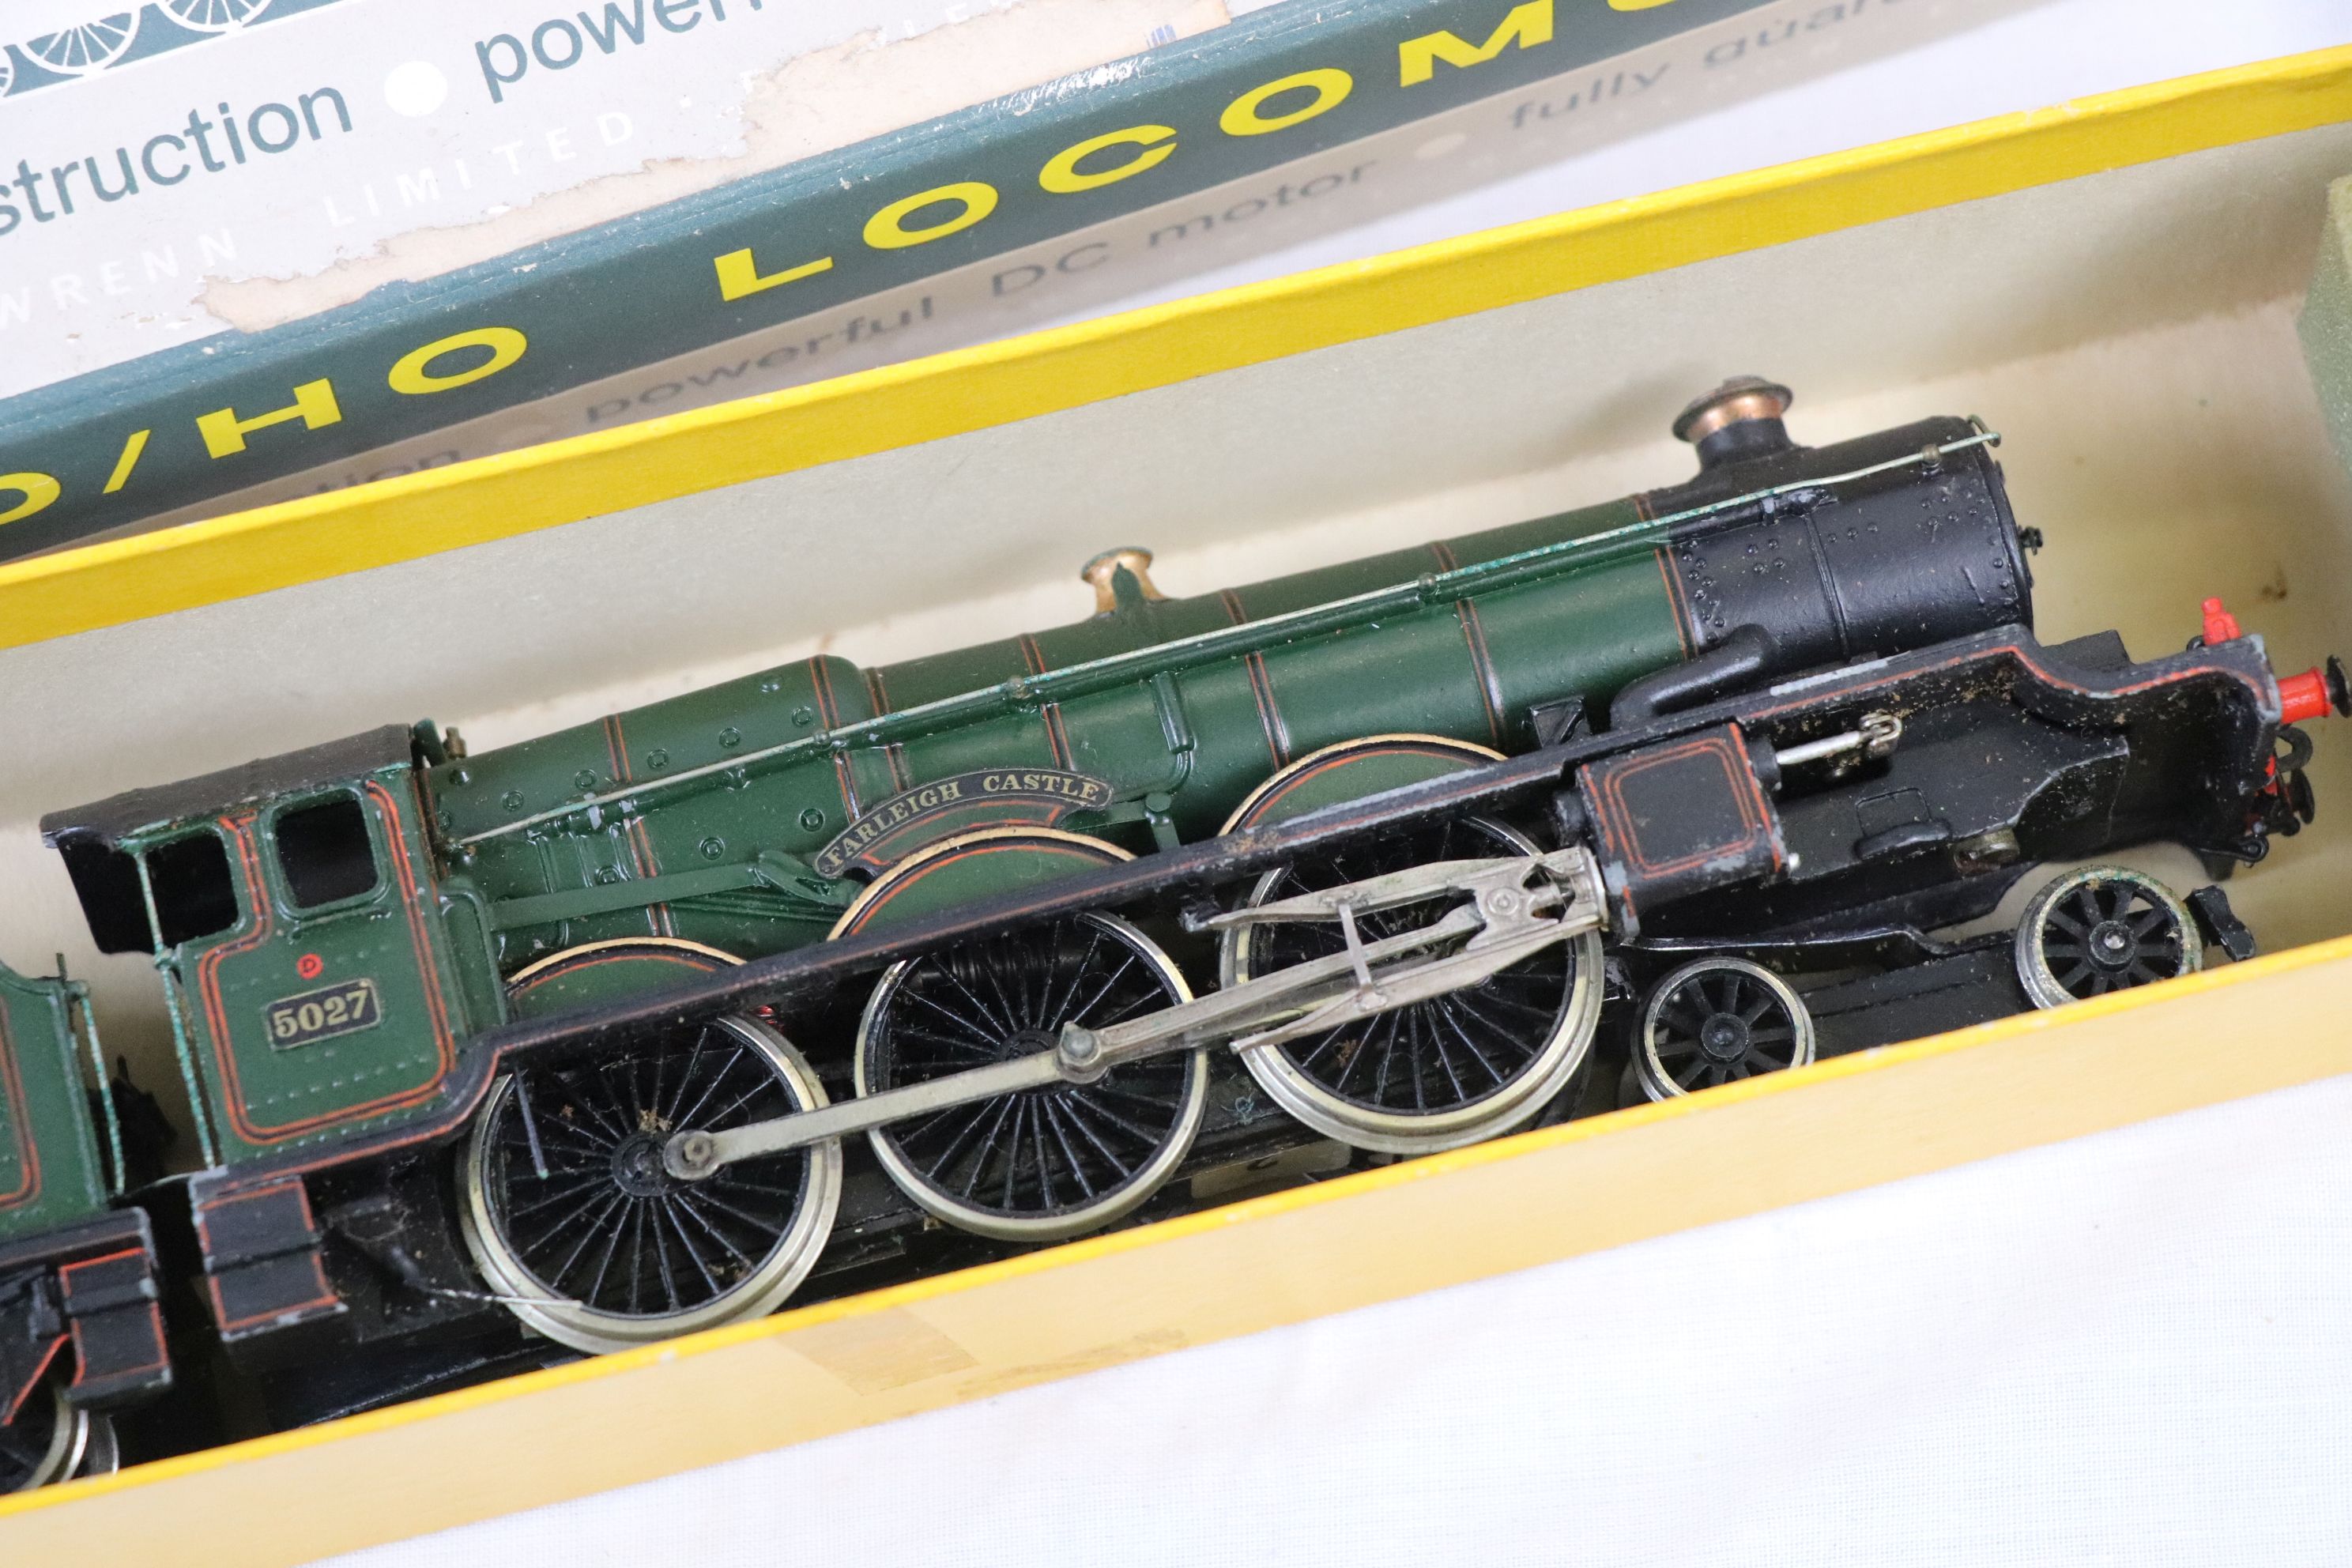 Hornby Dublo Farleigh Castle 5027 locomotive with tender contained within a Wrenn box - Image 3 of 3